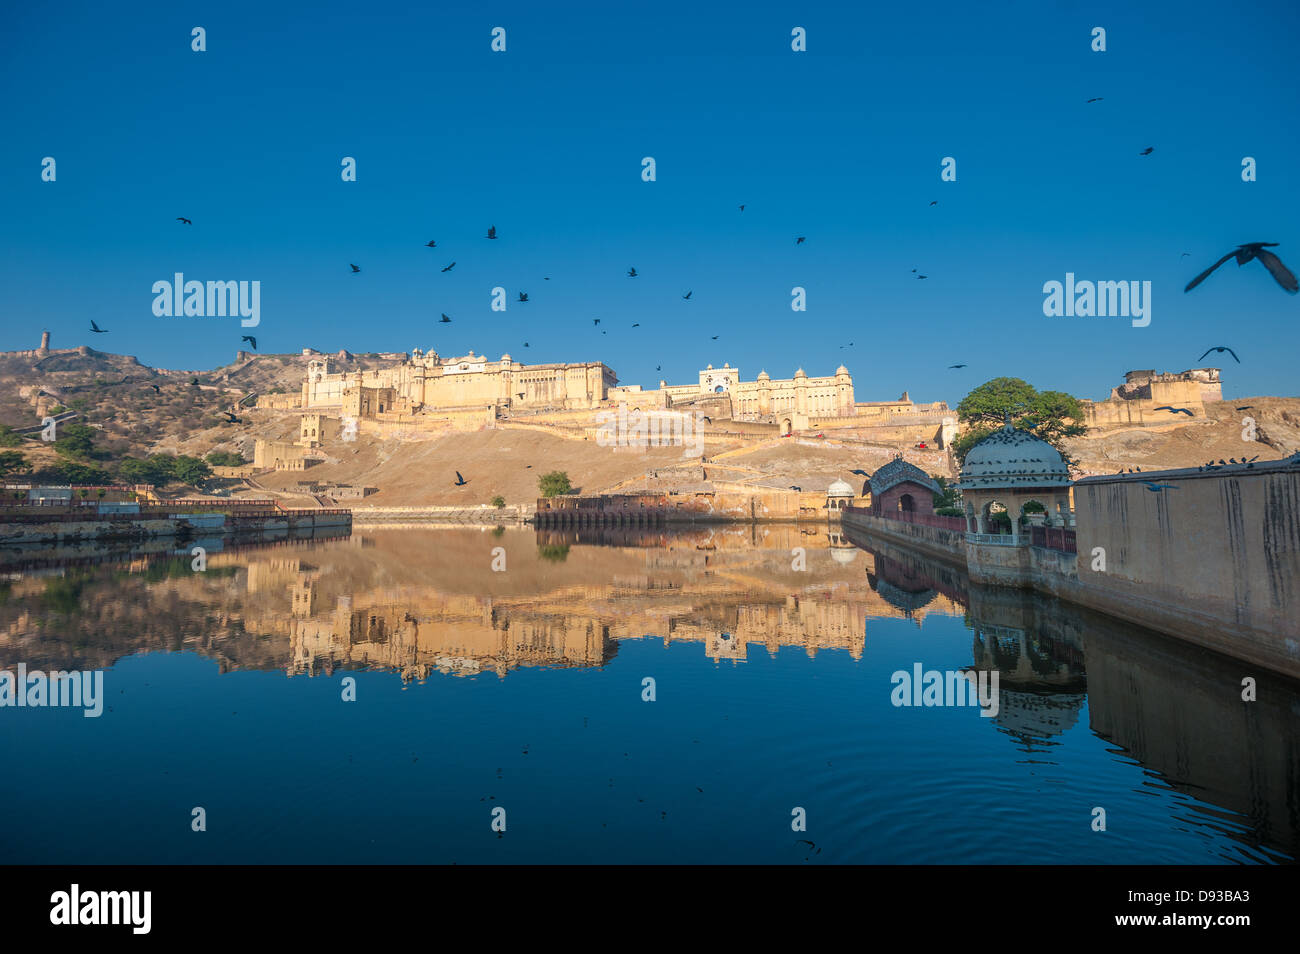 Amber fort, a Jaipur, India Foto Stock